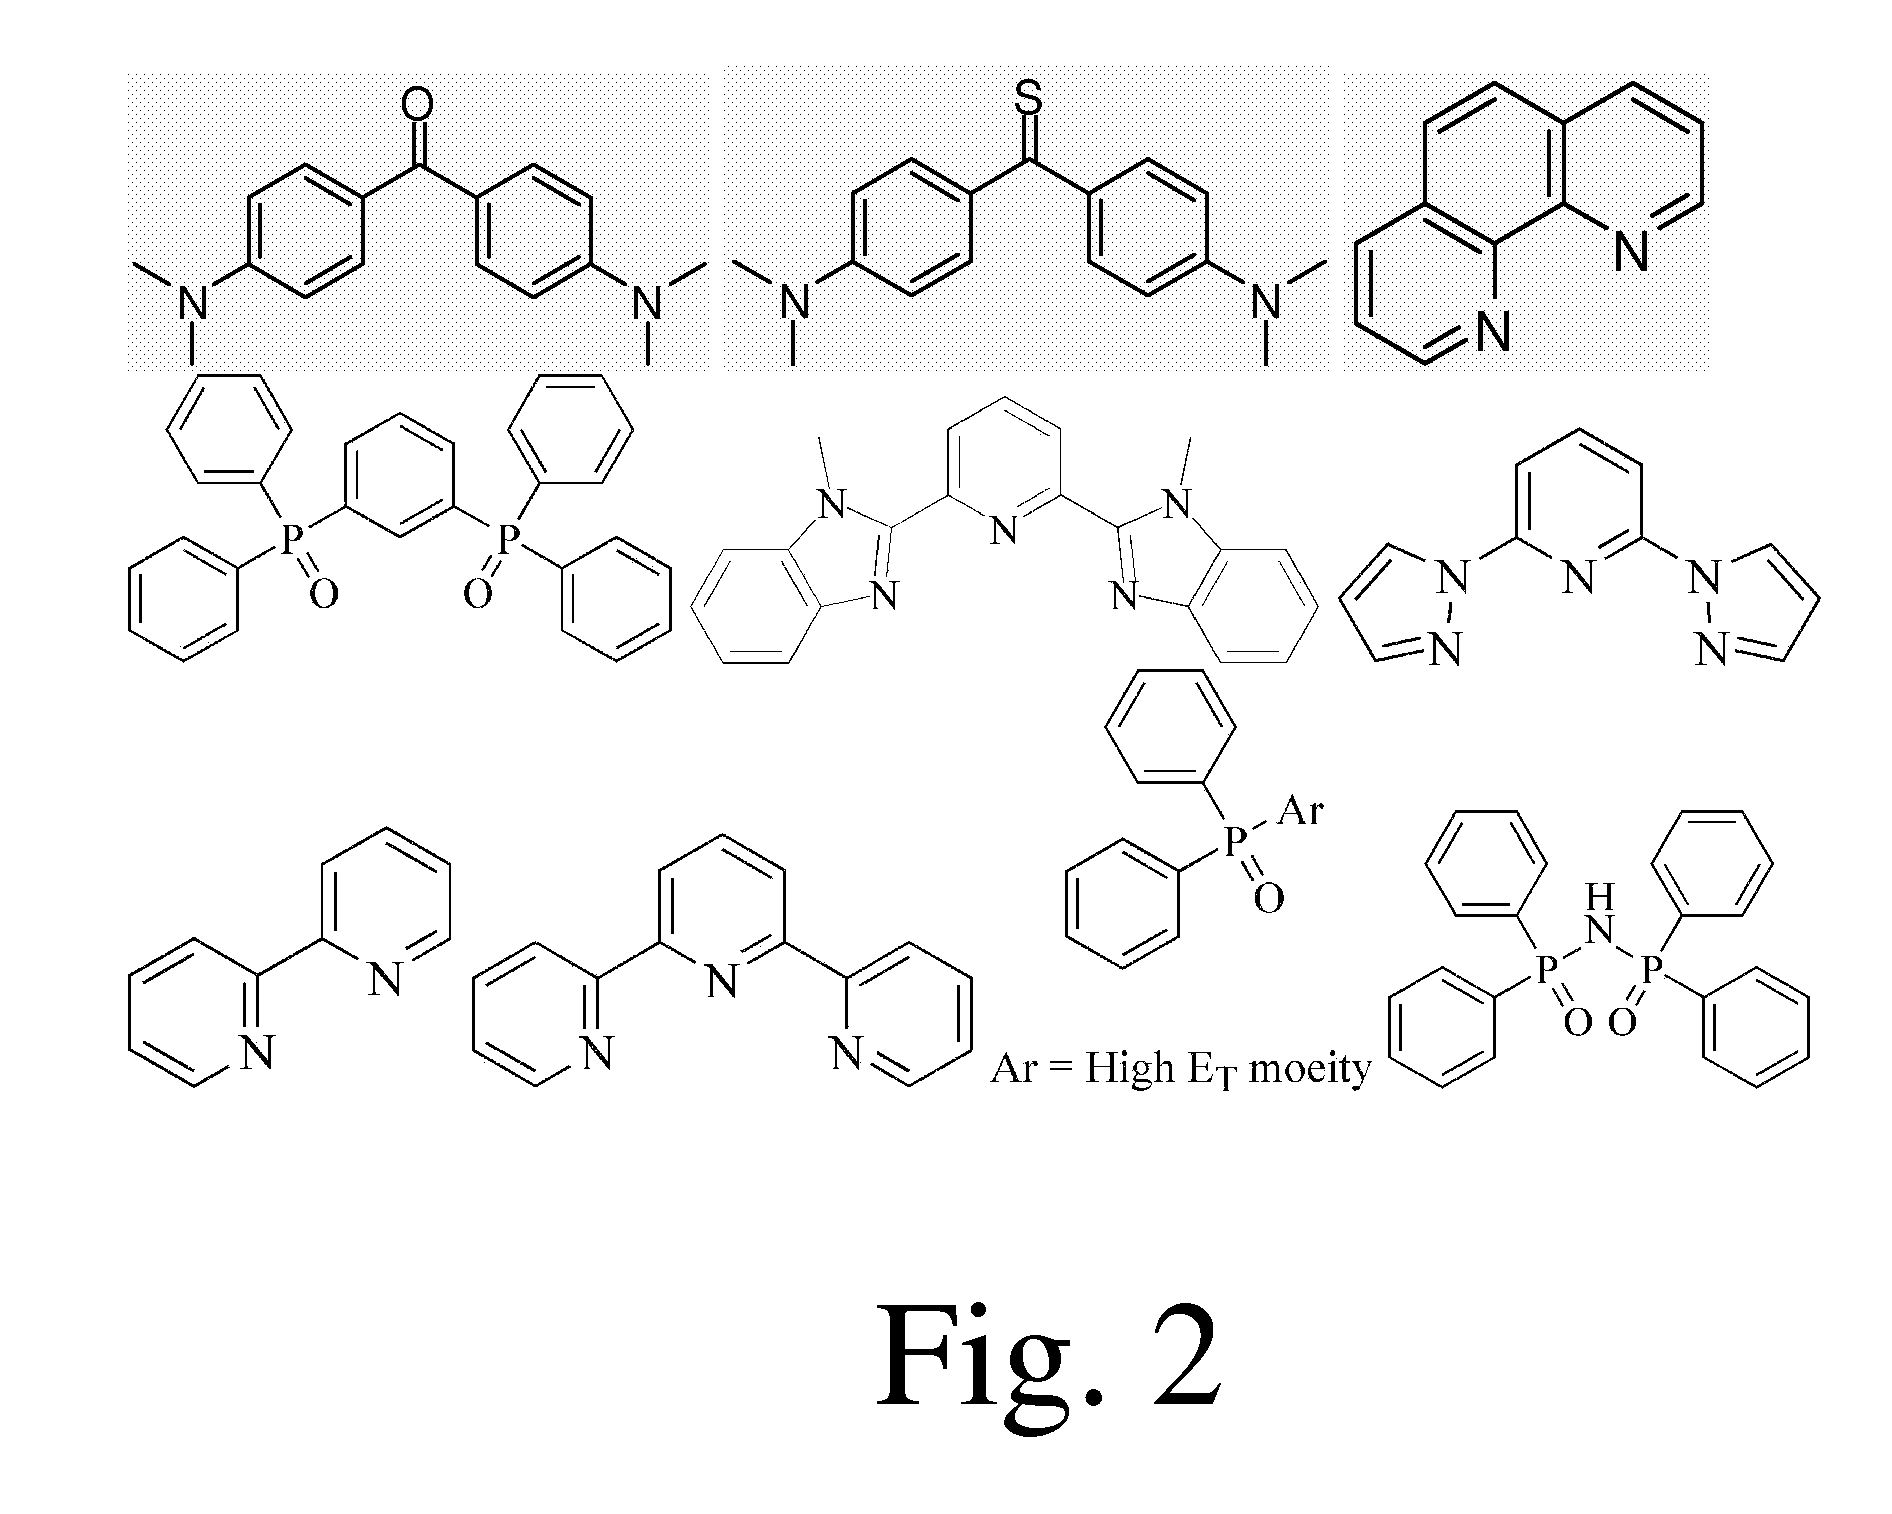 Organic-Inorganic Complexes Containing a Luminescent Rare earth-Metal Nanocluster and an Antenna Ligand, Luminescent Articles, and Methods of Making Luminescent Compositions